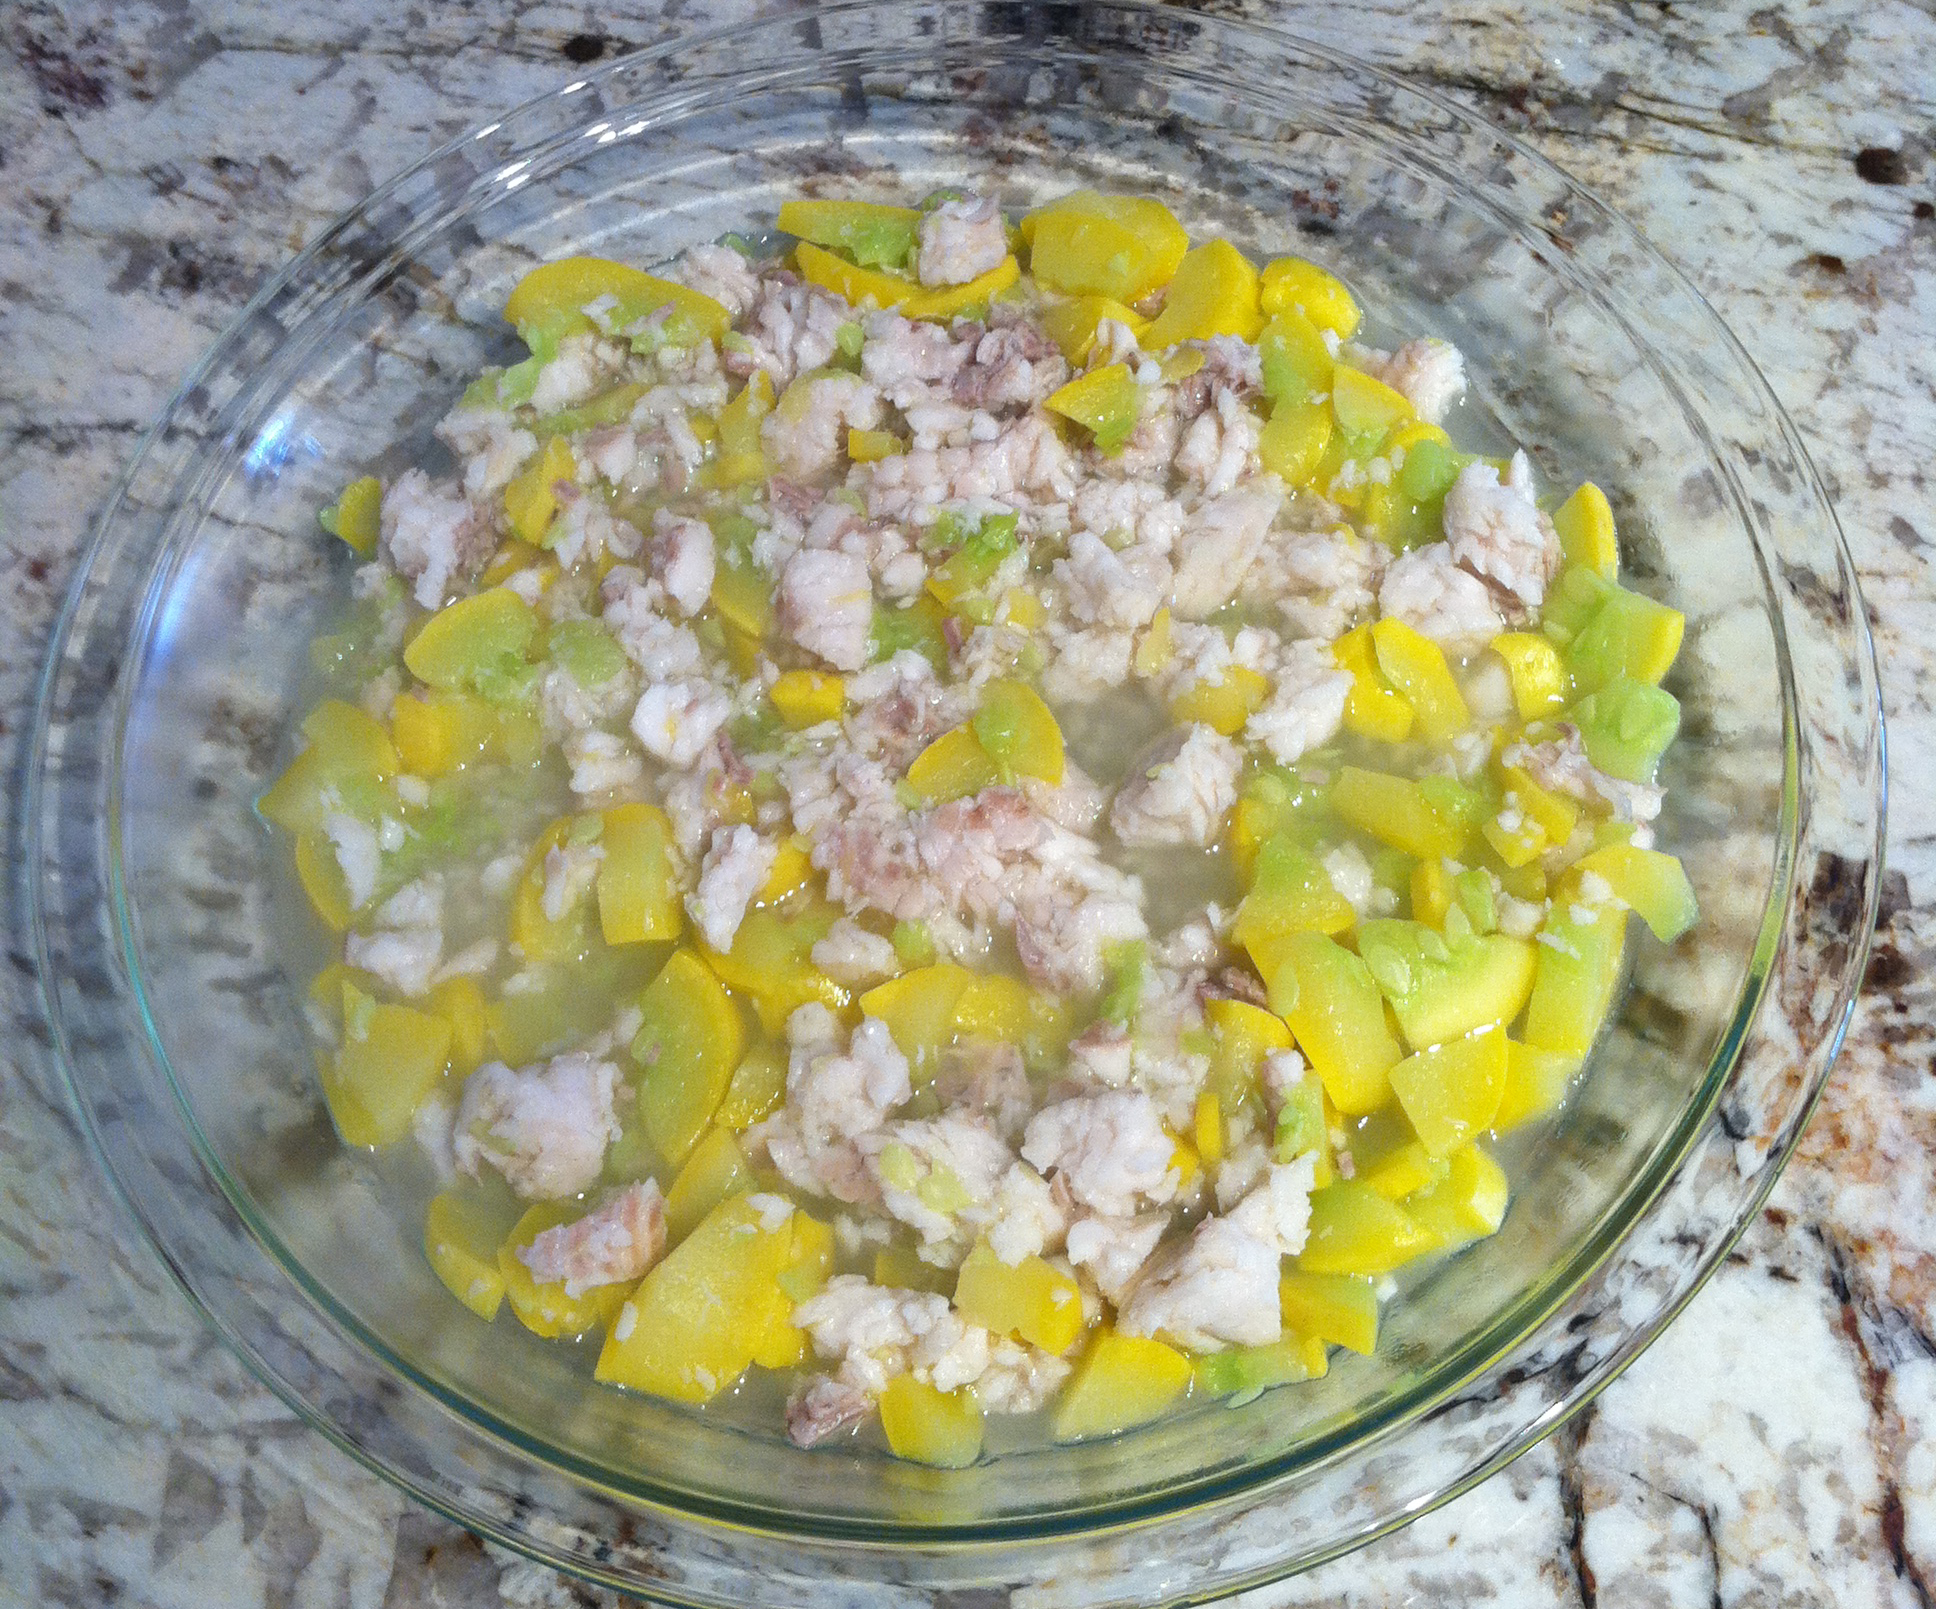 Fish for Dogs – Healthy Homemade Dog Food Idea